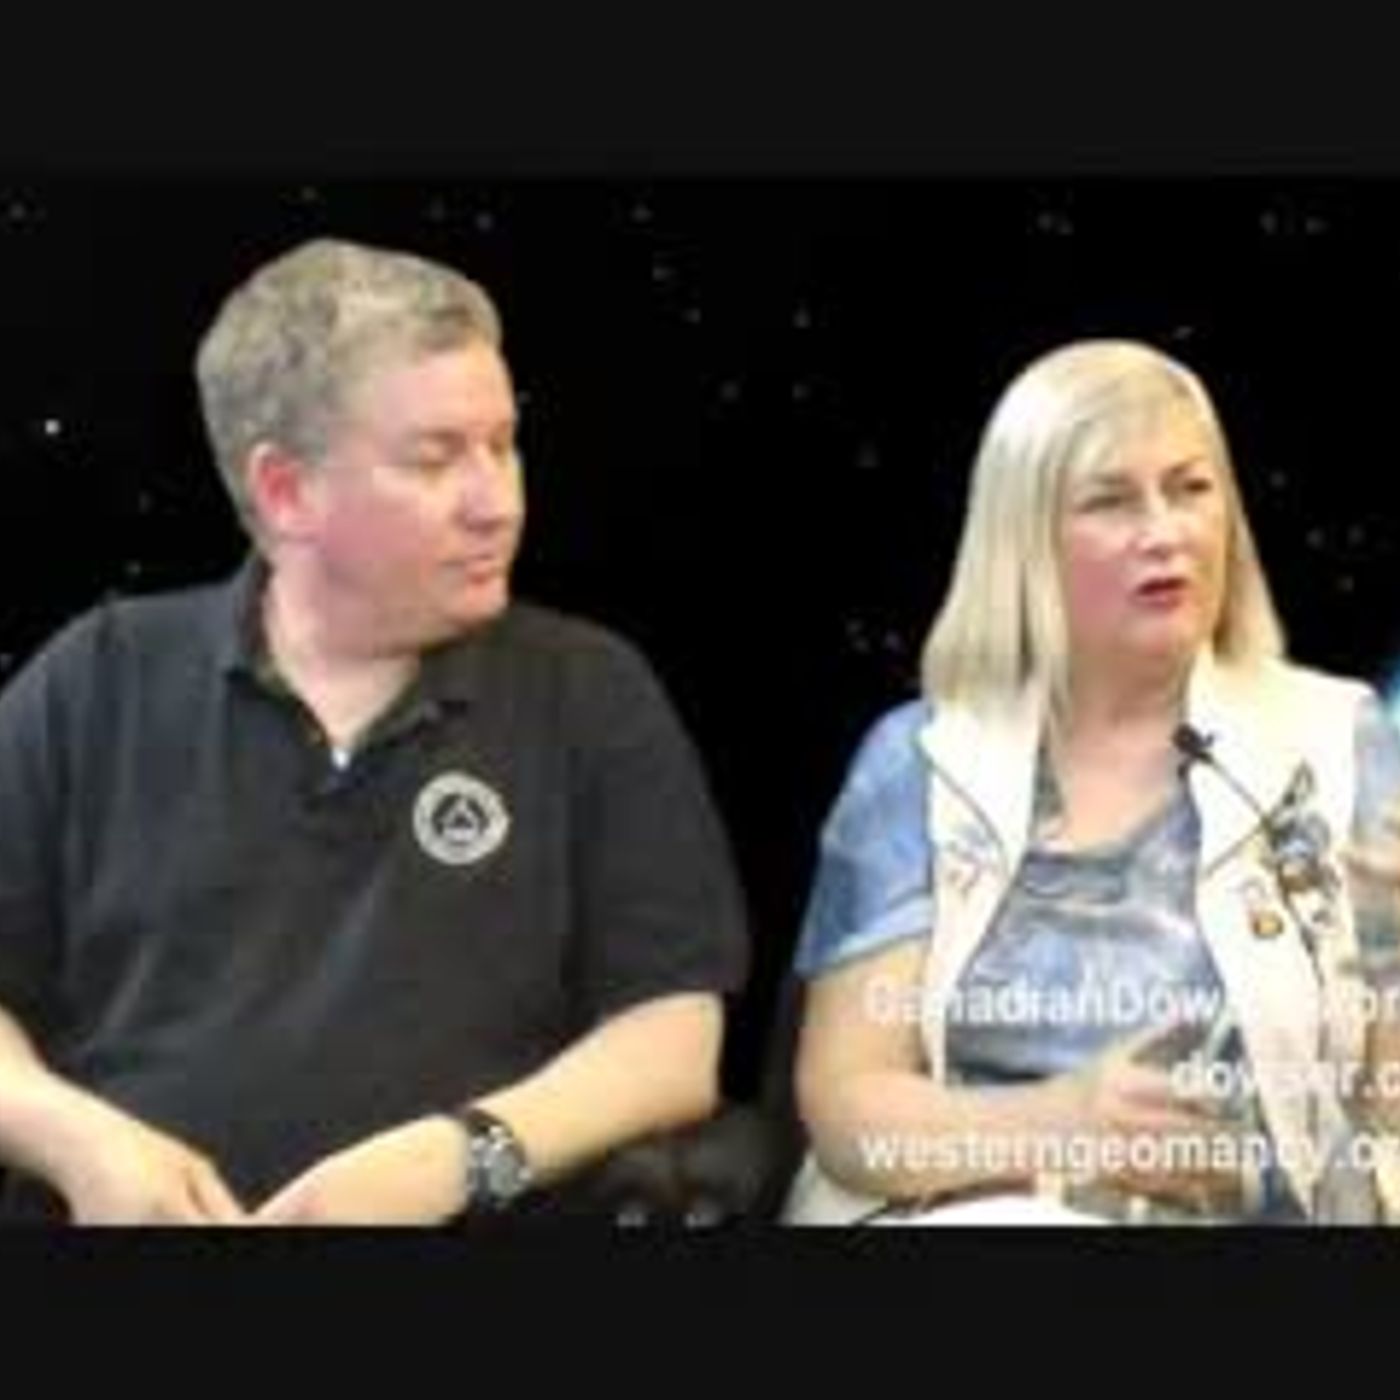 All about dowsing with Susan Collins & Grahame Gardner